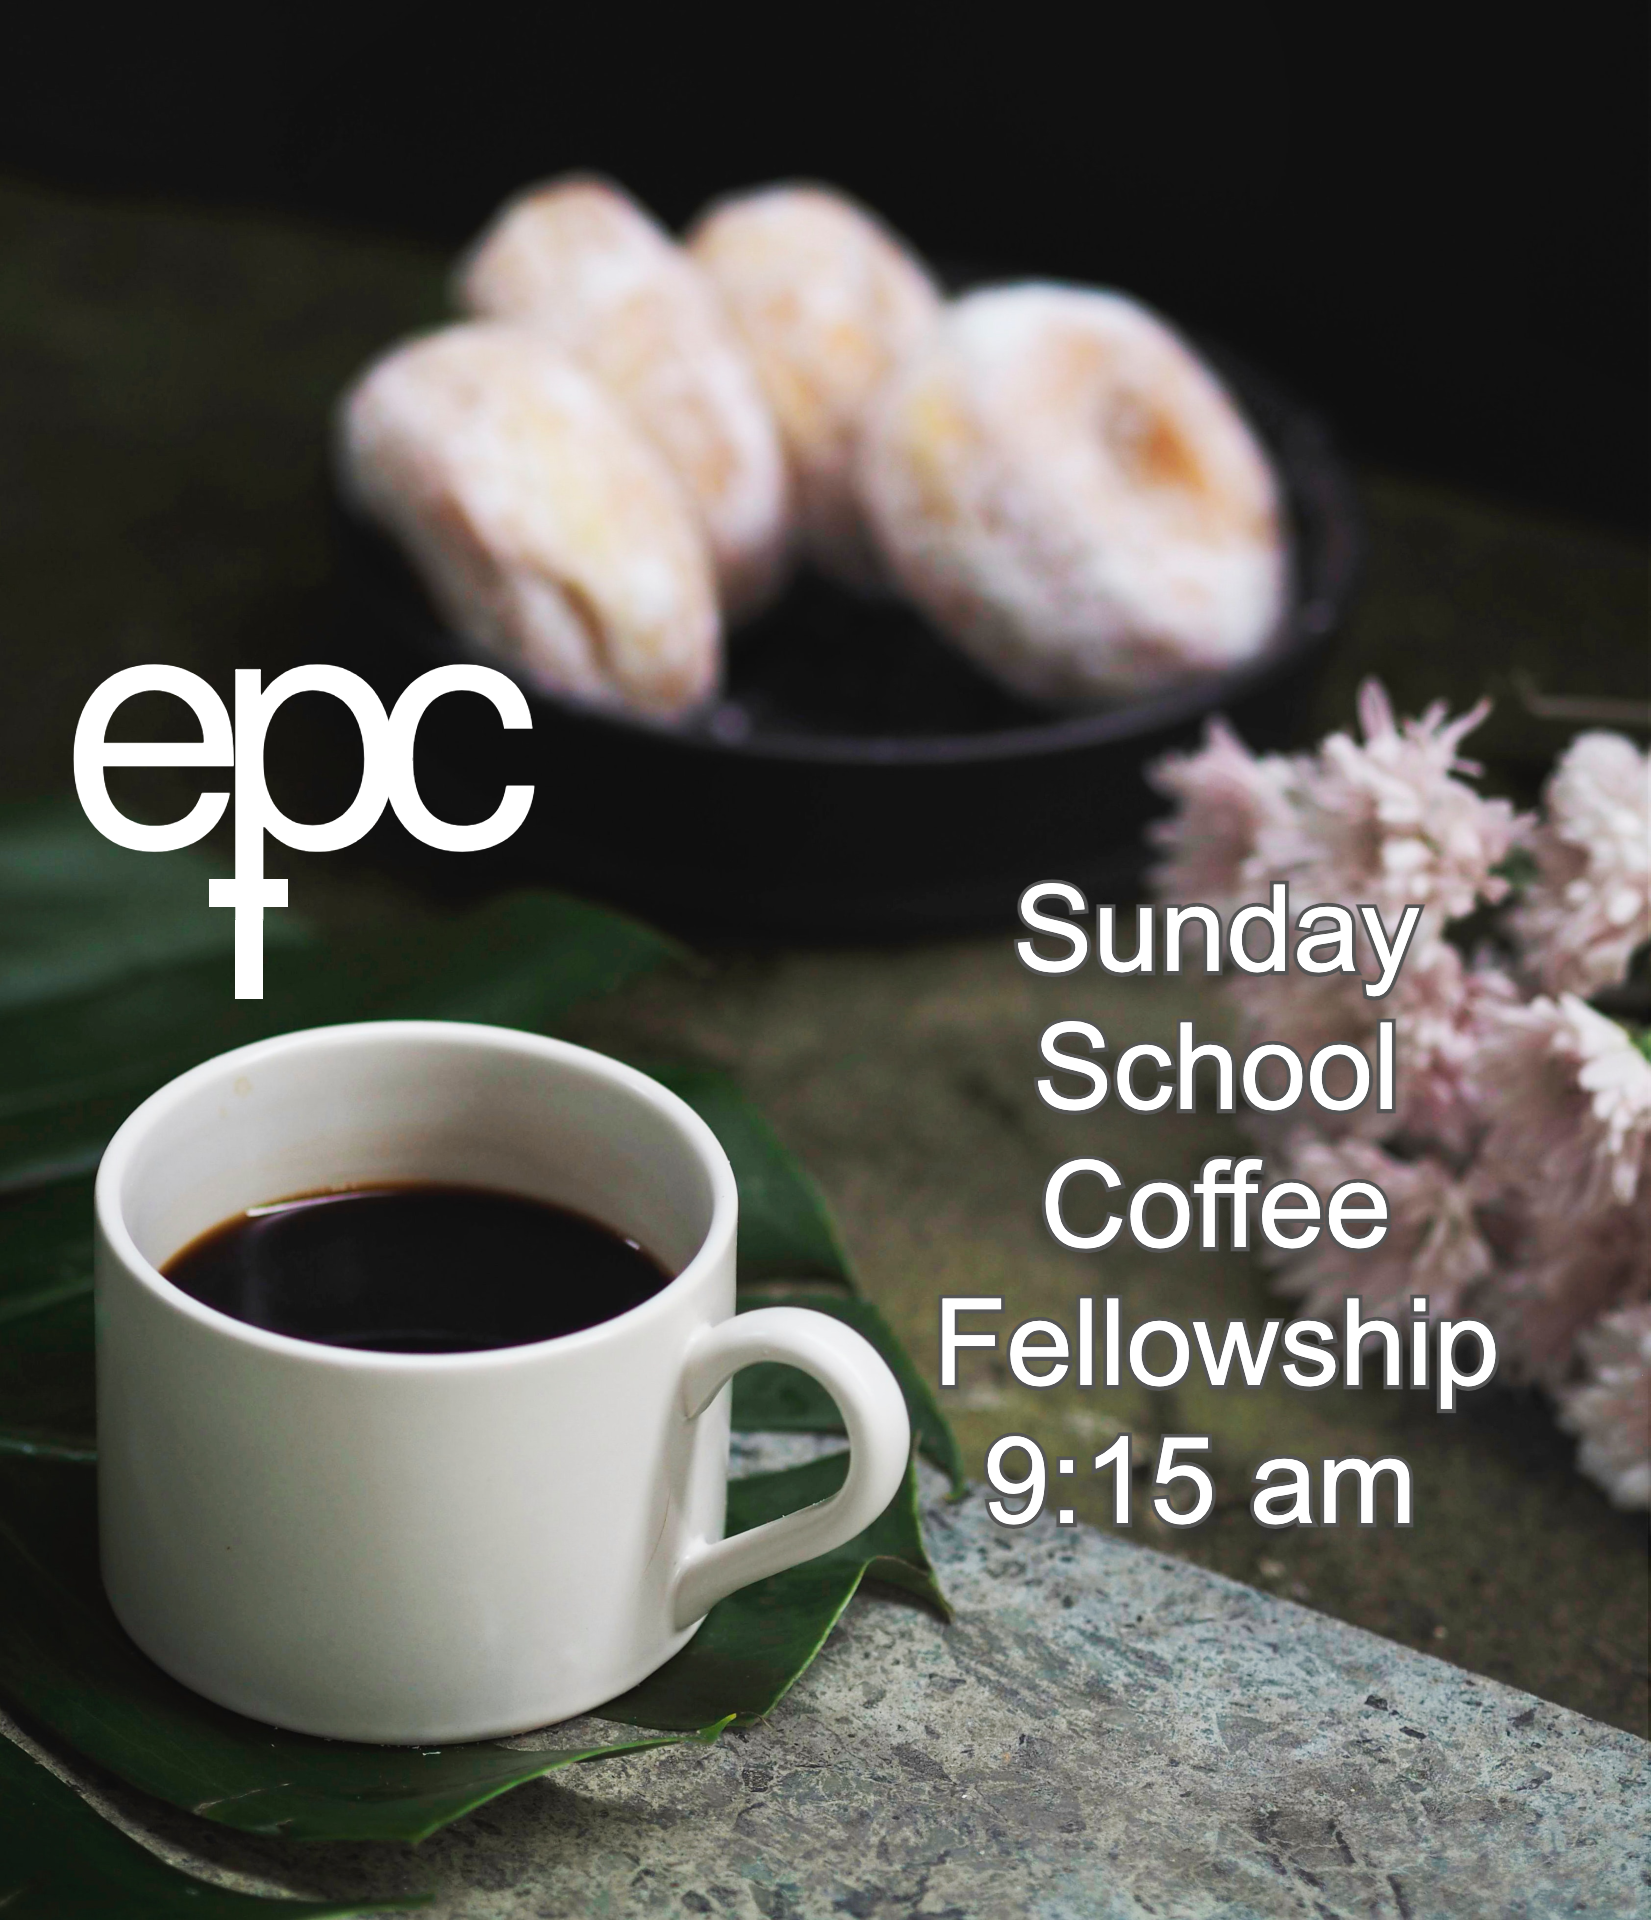 Pic of coffee & doughnuts for the EPC Sunday School Fellowship.